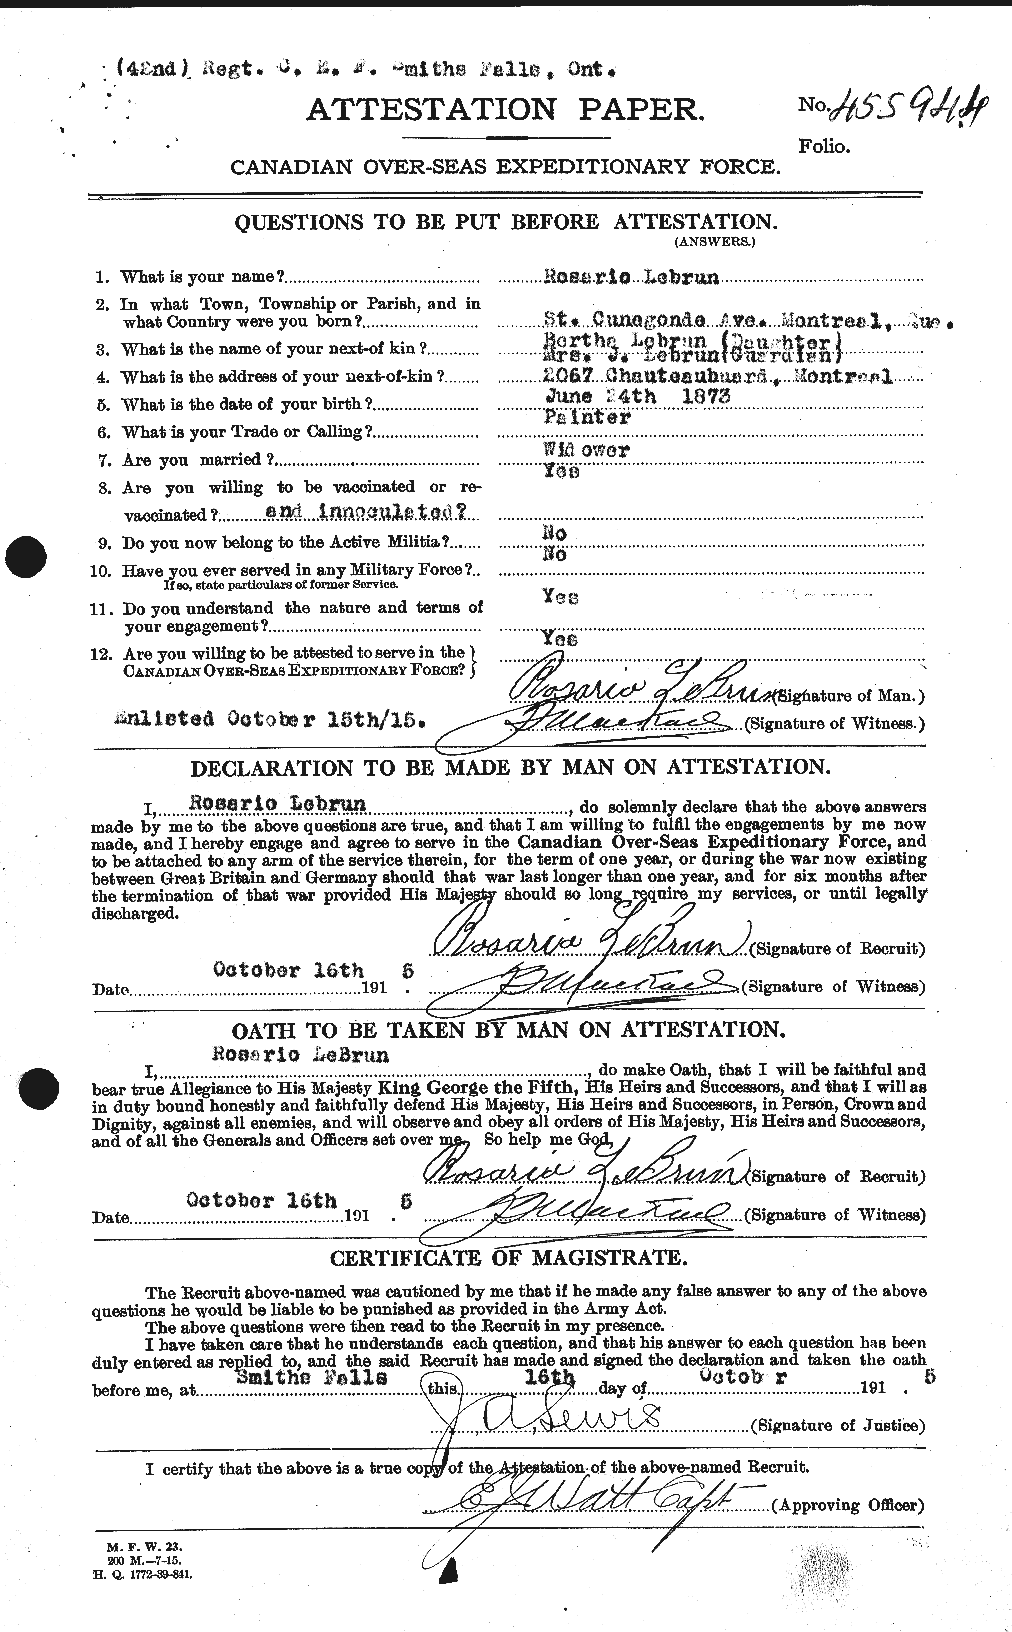 Personnel Records of the First World War - CEF 461589a